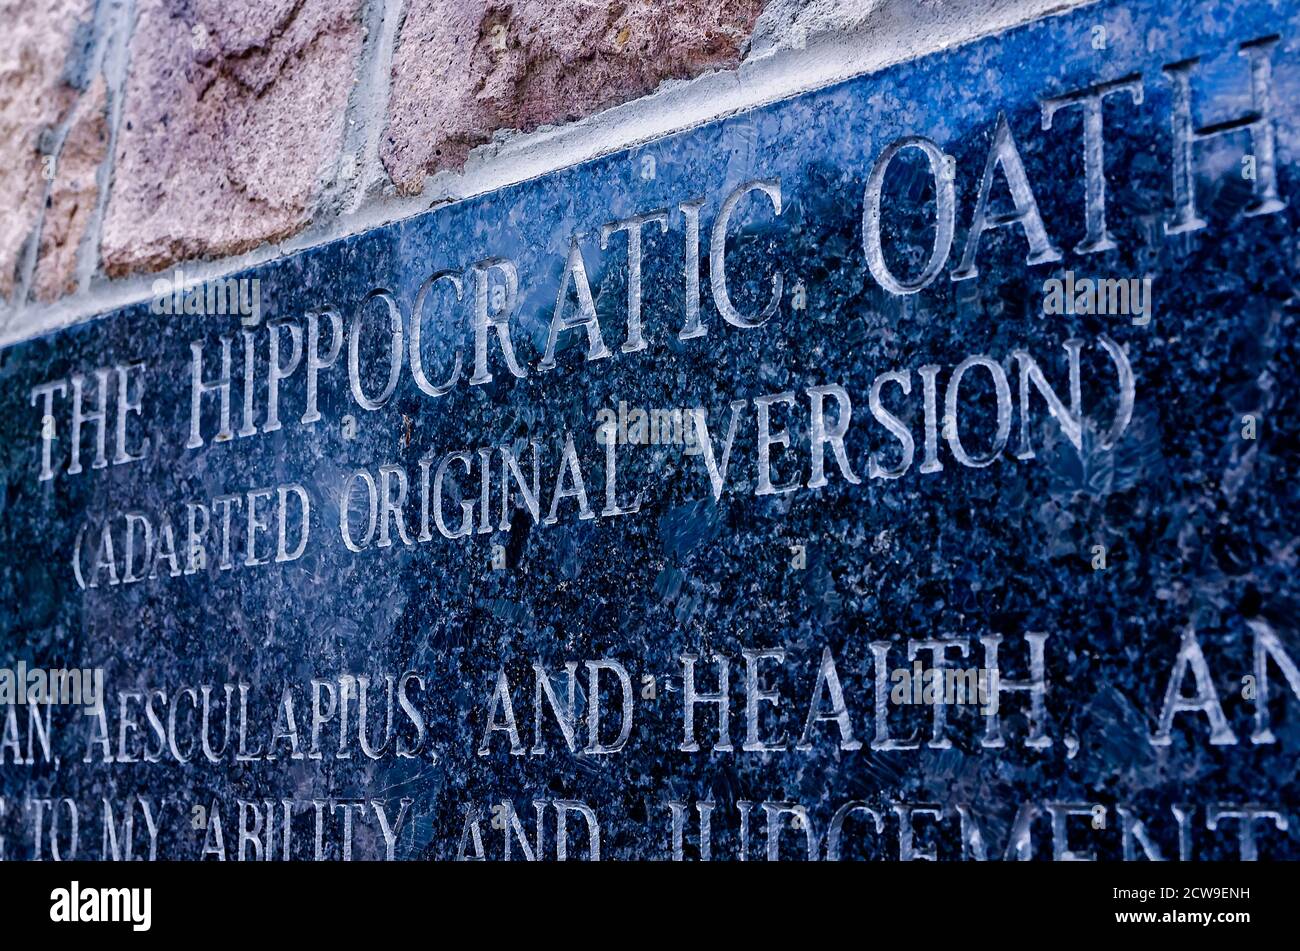 The Hippocratic Oath is printed on a wall at the University of South Alabama, Sept. 26, 2020, in Mobile, Alabama. Stock Photo